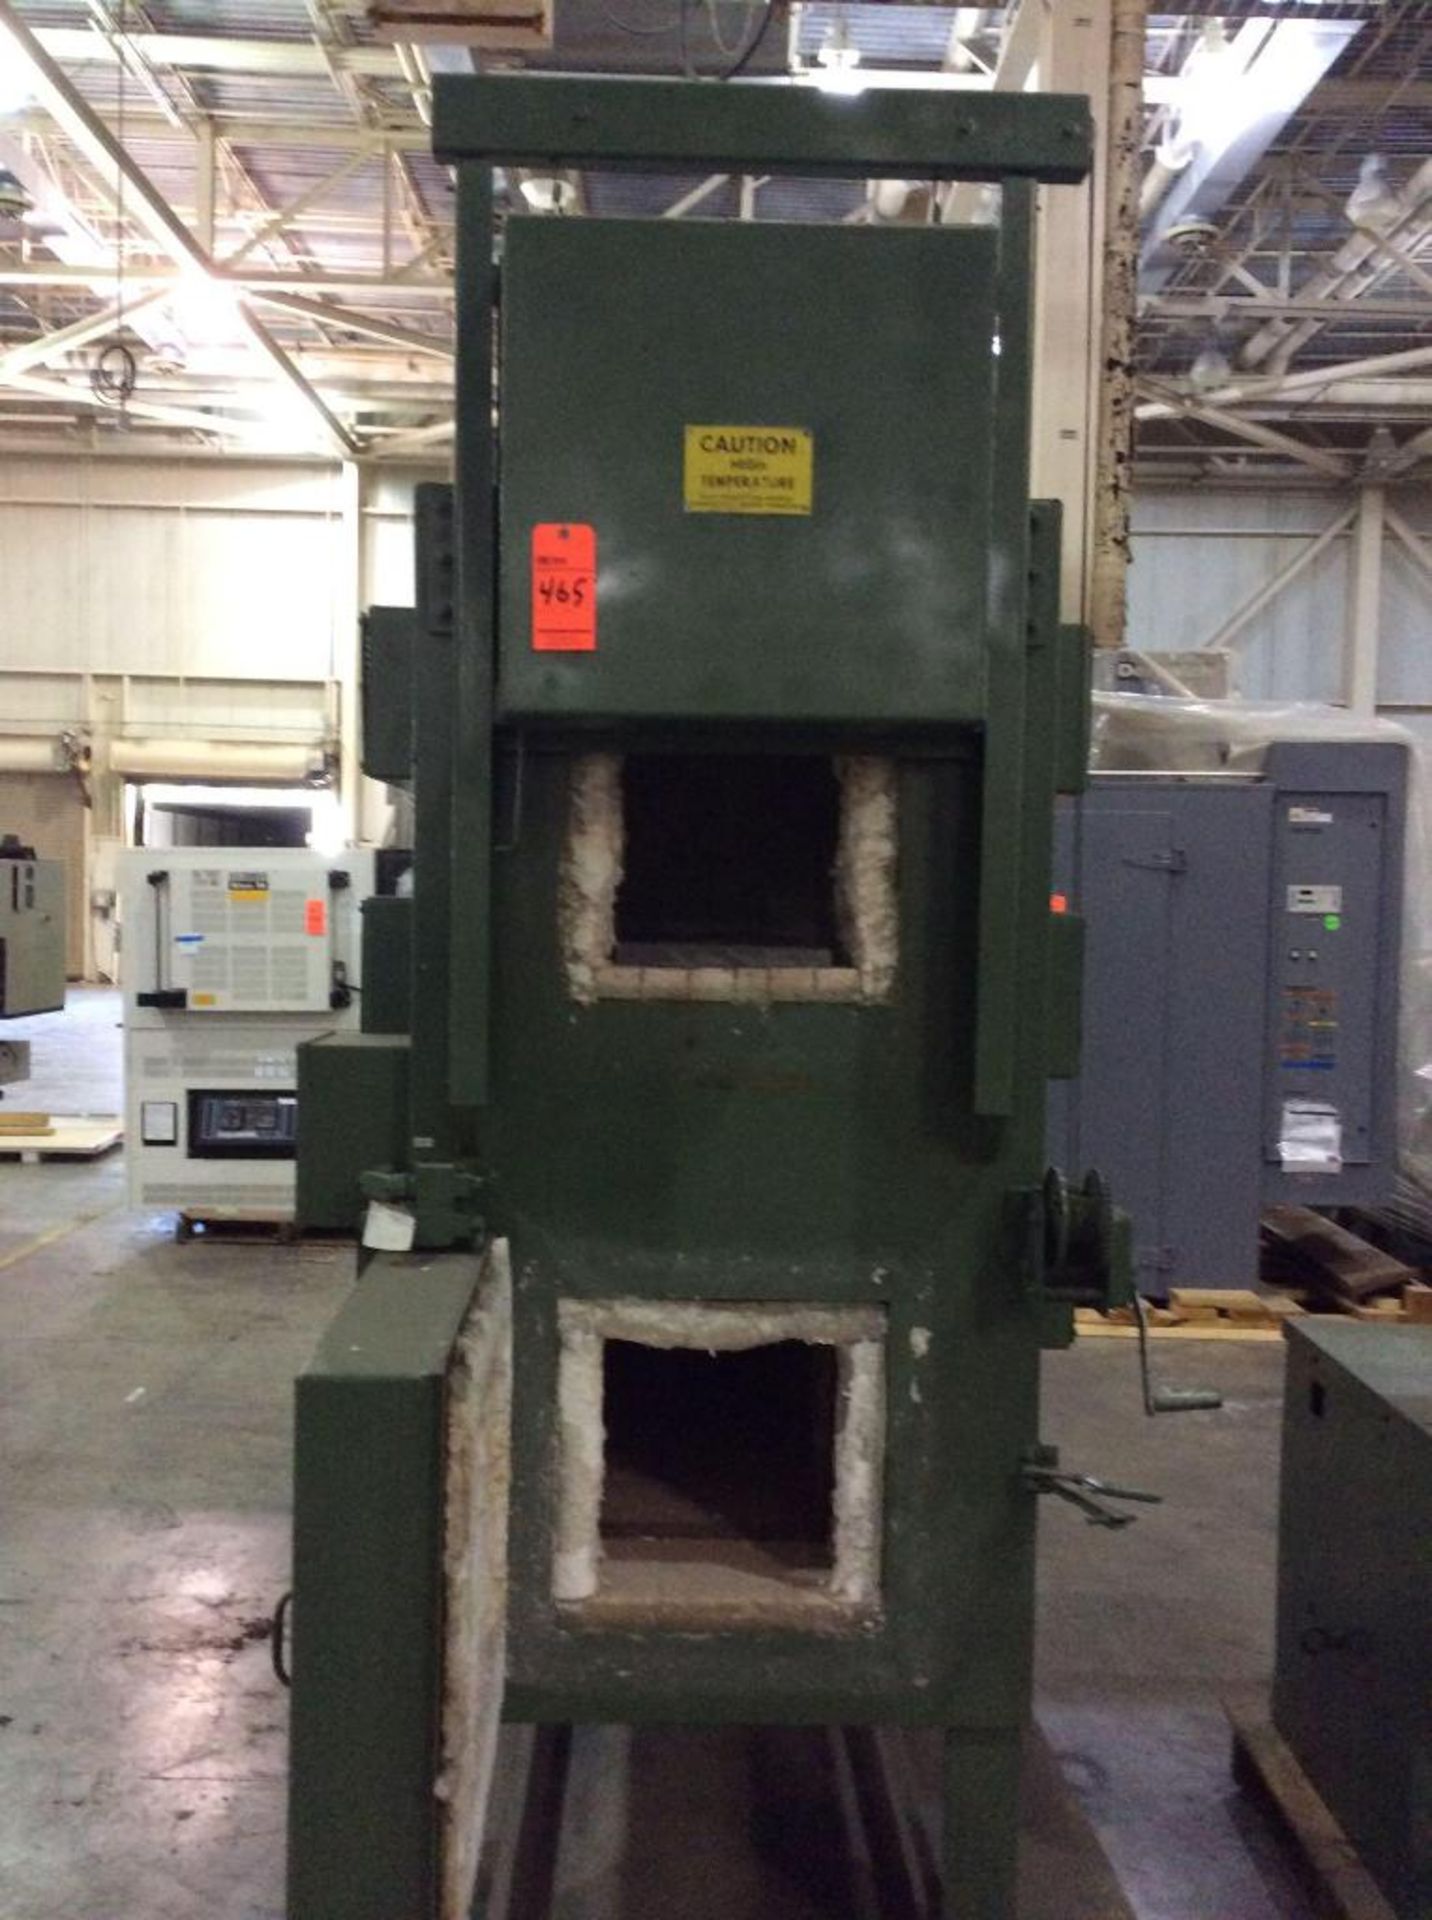 Brimstone oven, mn BF23/12-3FE, sn 83-125-3, 440 volt, 3 phase, (2) 36" x 12" x 12" compartments - Image 2 of 4